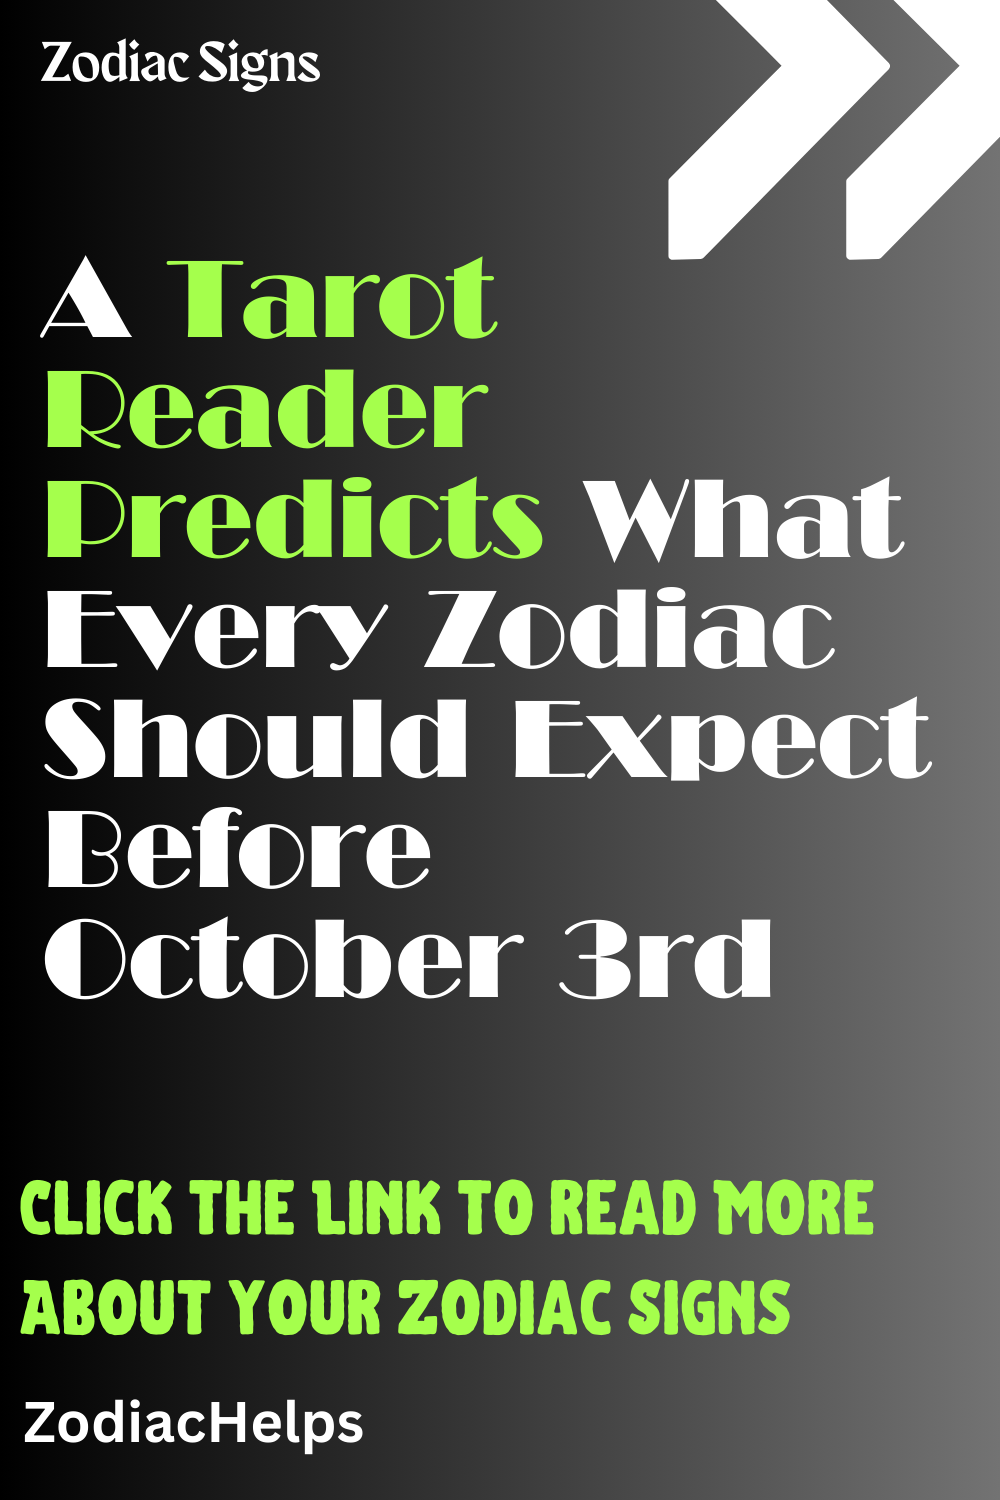 A Tarot Reader Predicts What Every Zodiac Should Expect Before October 3rd